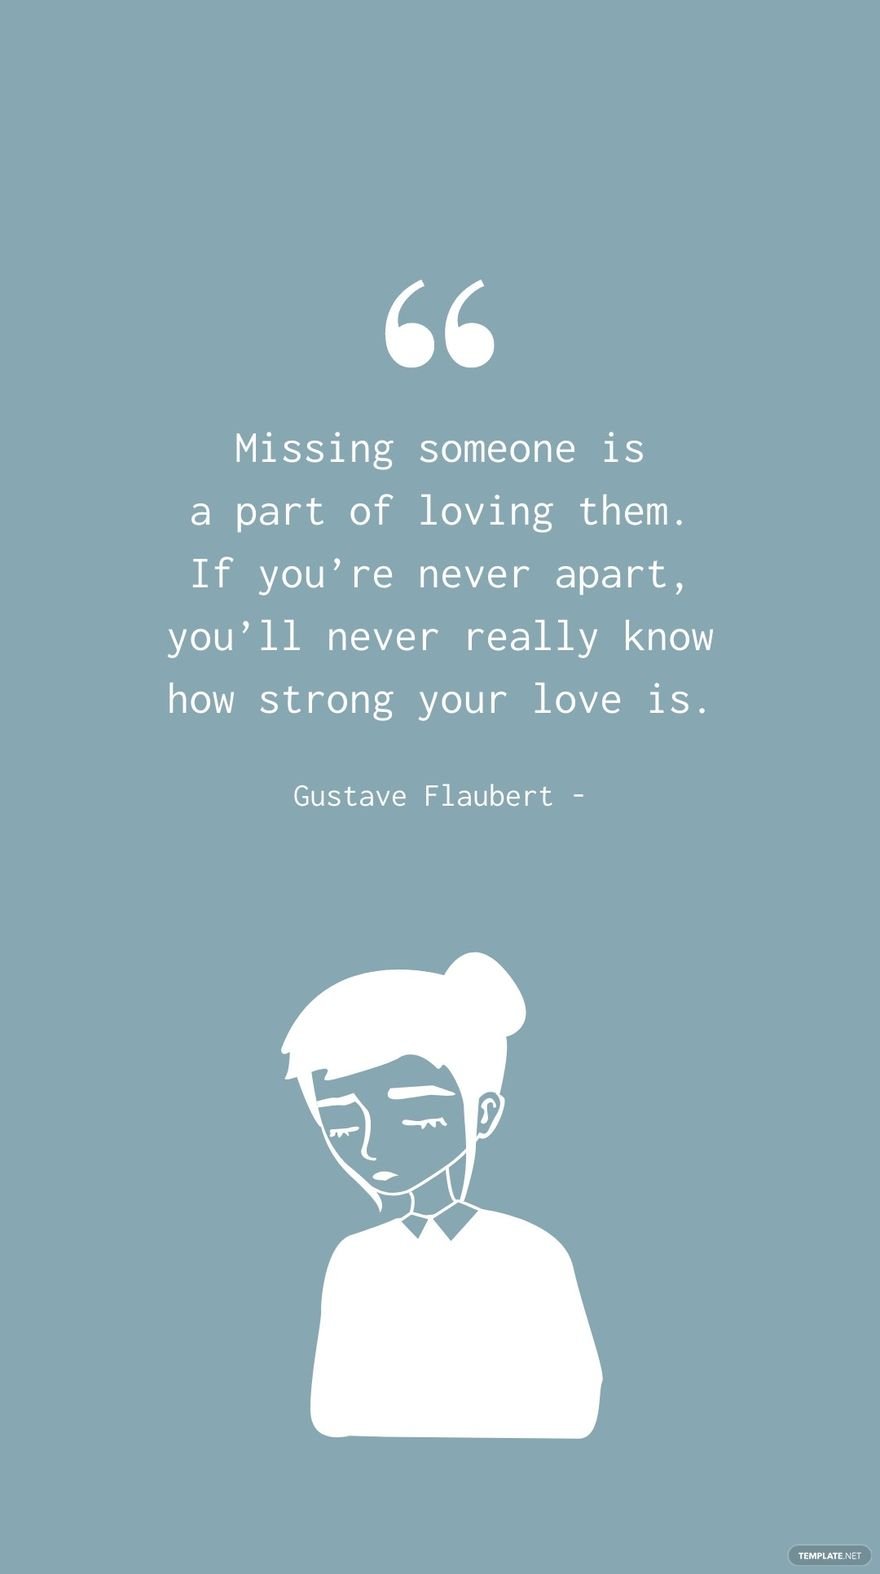 Gustave Flaubert - Missing someone is a part of loving them. If you’re never apart, you’ll never really know how strong your love is.